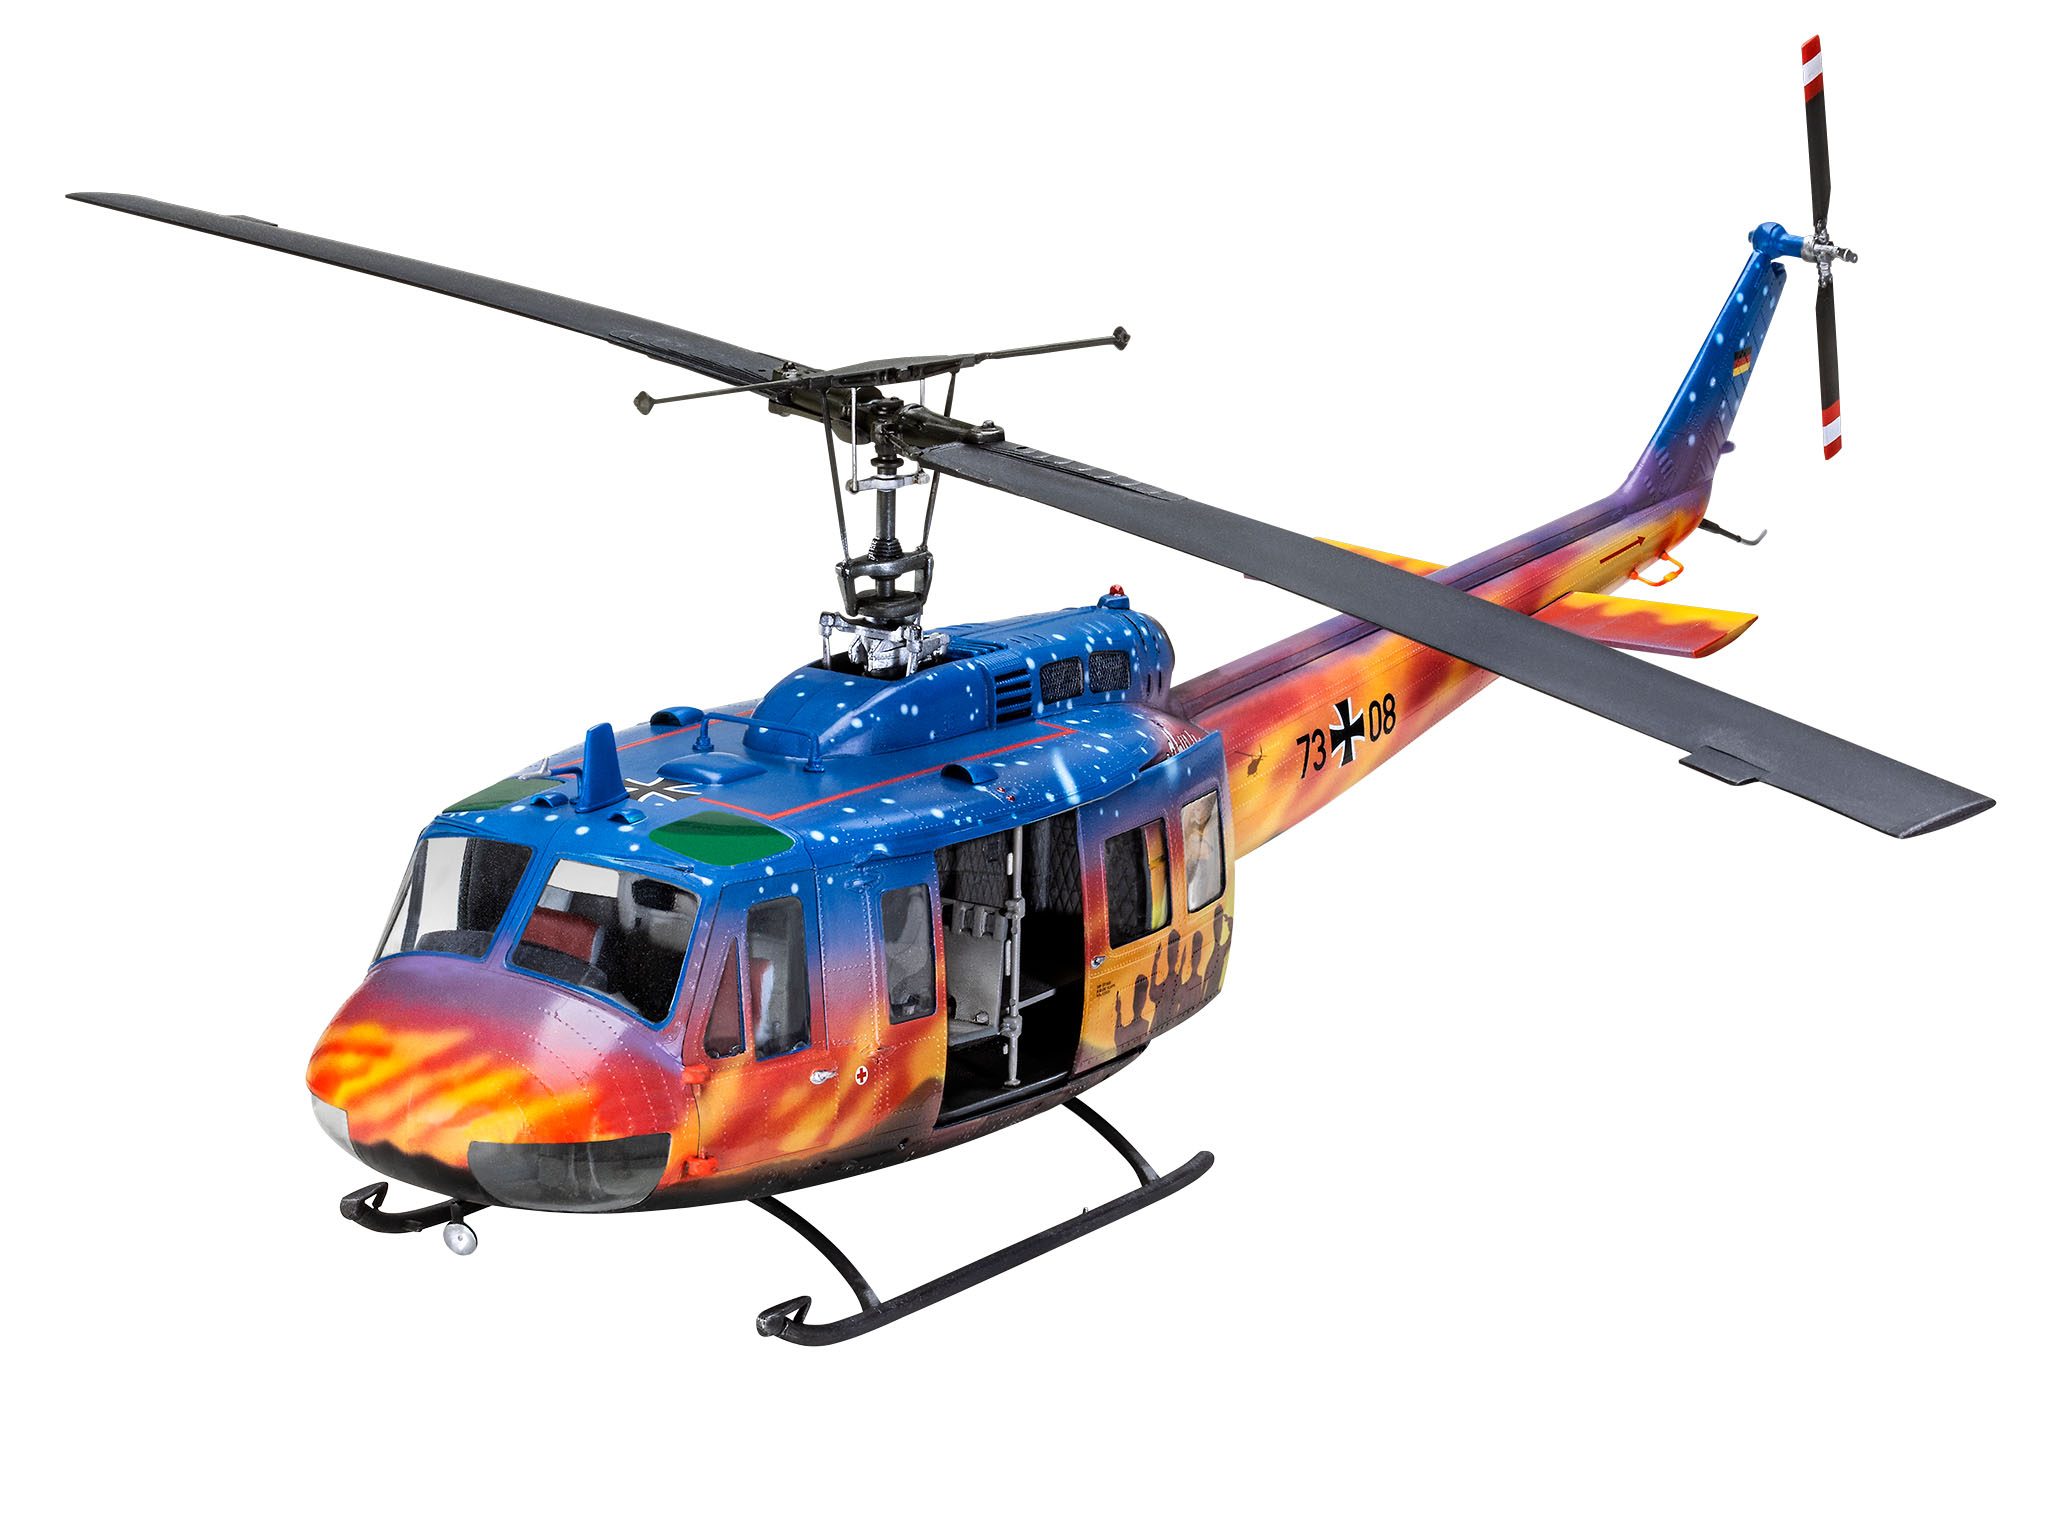 Revell 1/32 Bell UH-1D 'Goodbye Huey' Bundeswehr (German Armed Forces) LIMITED EDITION # 03867